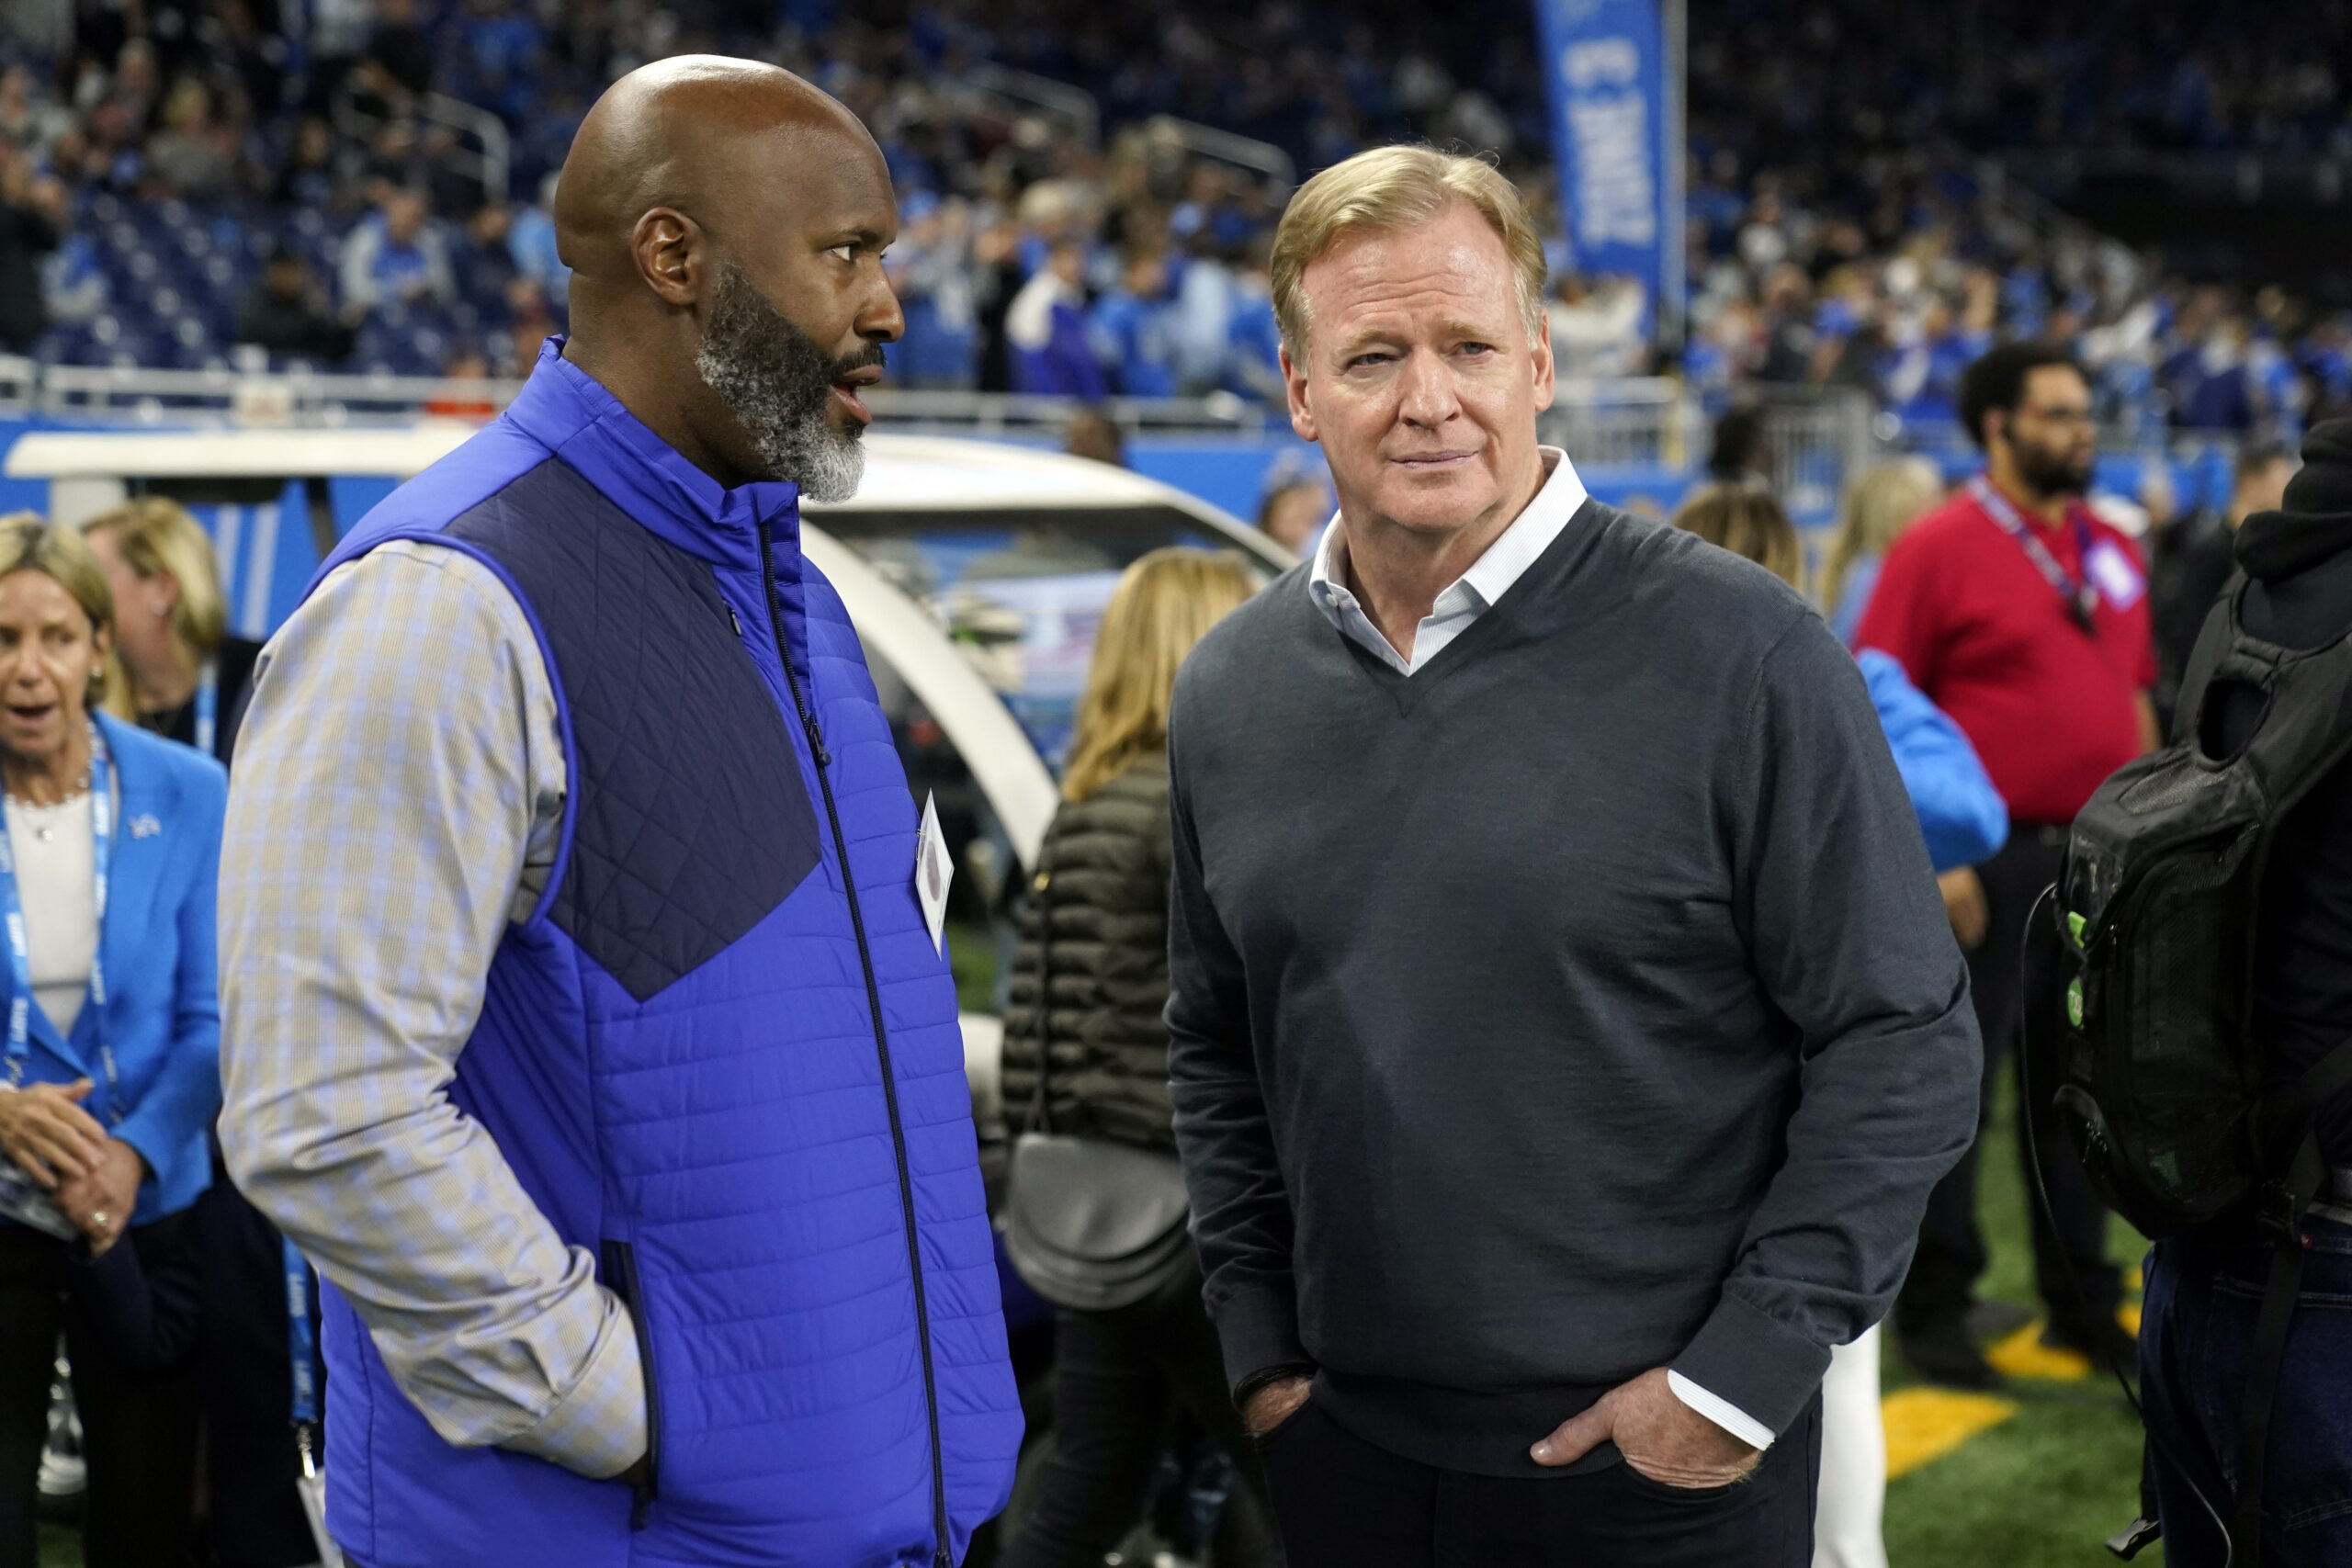 Detroit Lions general manager Brad Holmes, left, talks with NFL Commissioner Roger Goodell before the first half of an NFL football game, Sunday, Nov. 19, 2023, in Detroit. Photo credit: Paul Sancya, The Associated Press